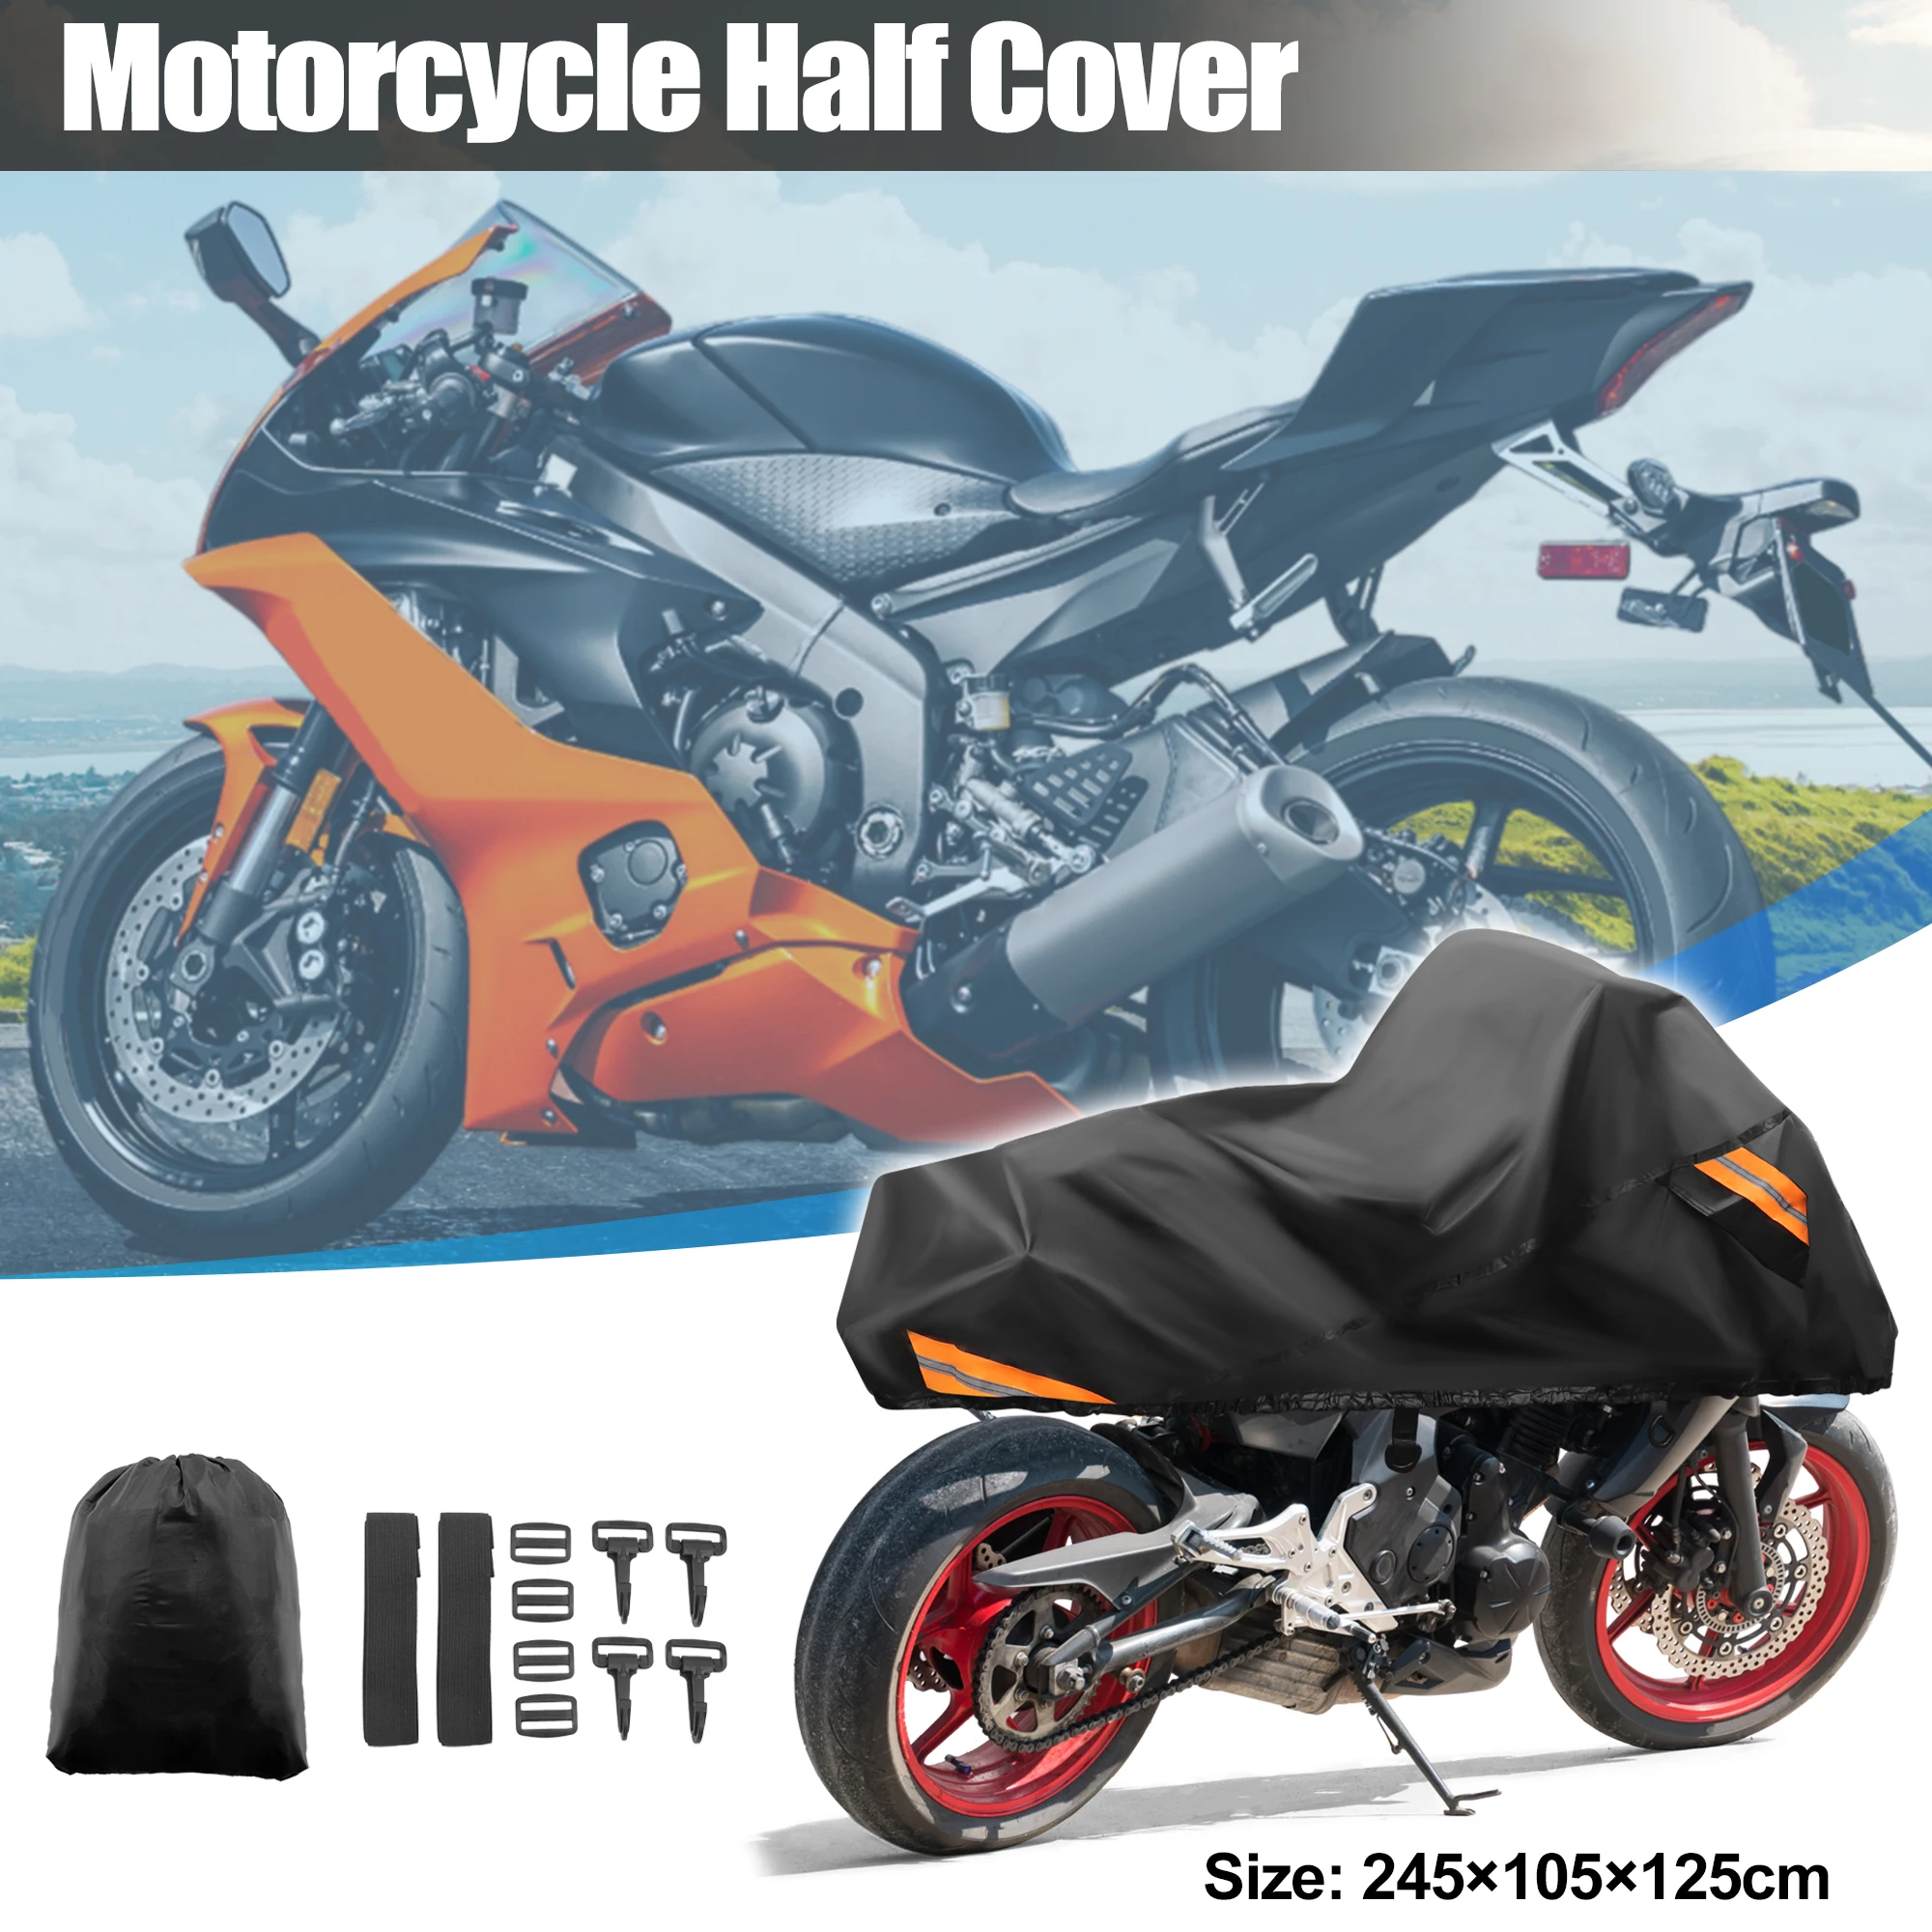 

UXCELL 300D Universal Waterproof Motorcycle Covers UV Protection Dust Rain Snow Scooter Outdoor Protector for Harley Dyna FXD